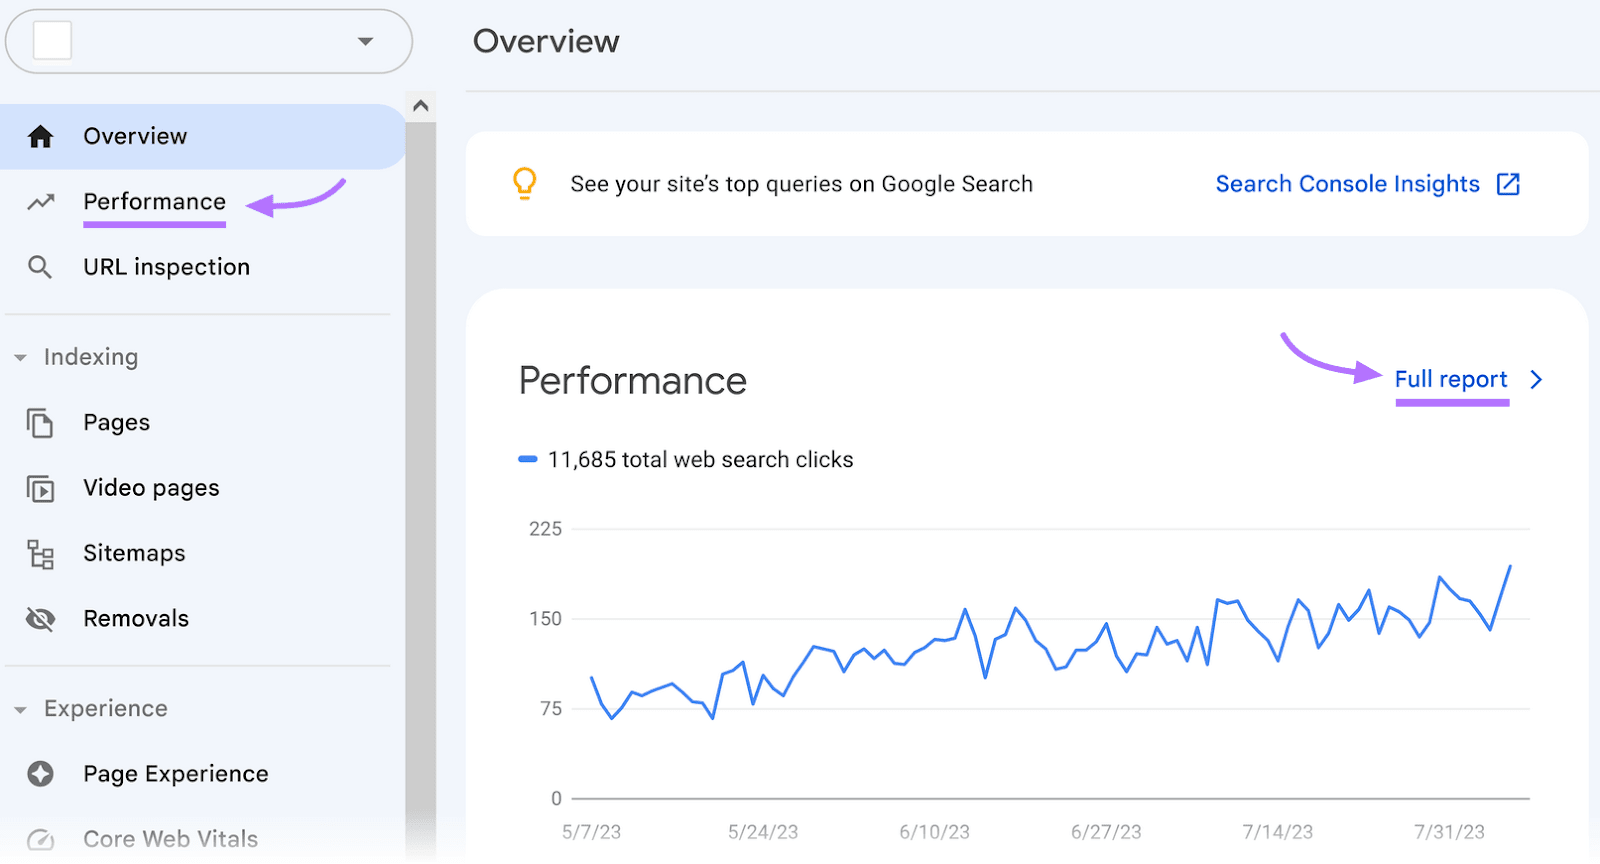 “Performance” and "Full report" buttons highlighted in Google Search Console